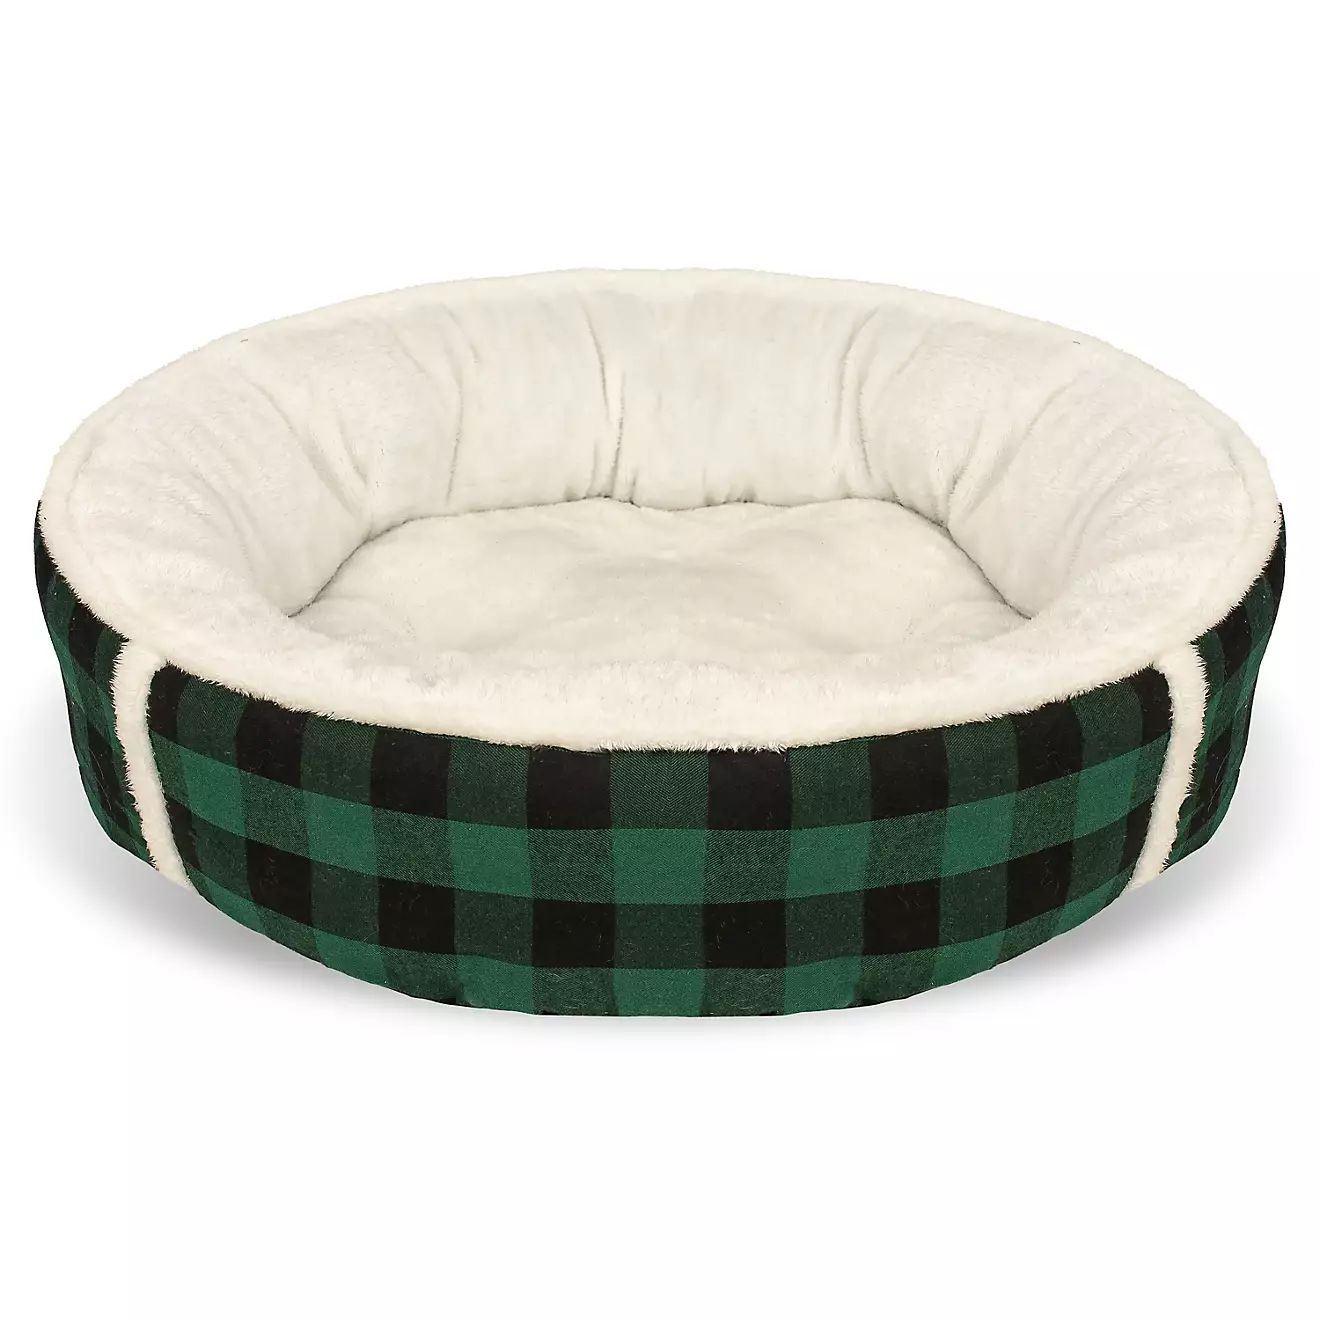 Cozy Pet Plaid Bolster Pet Bed | Academy | Academy Sports + Outdoors